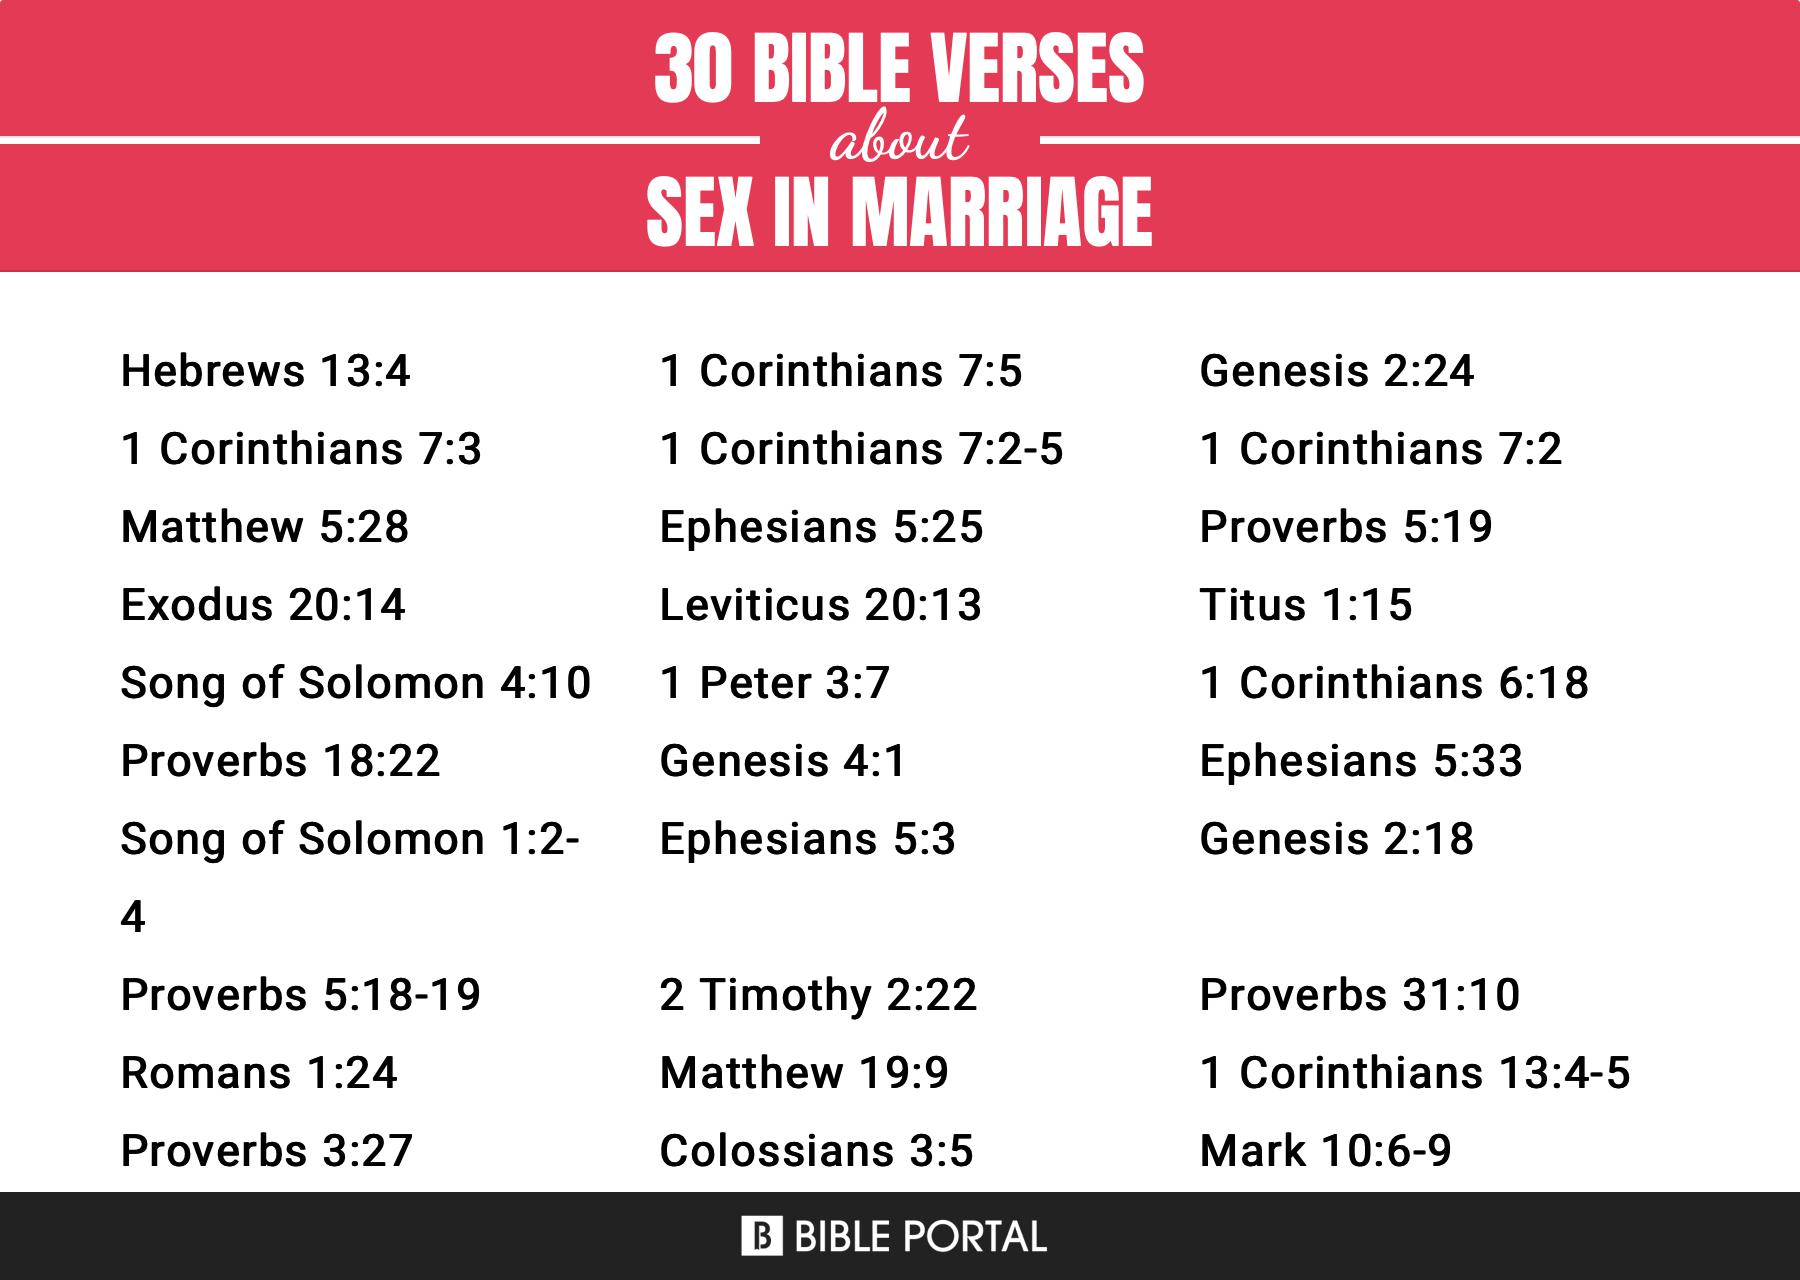 83 Bible Verses about Sex In Marriage?